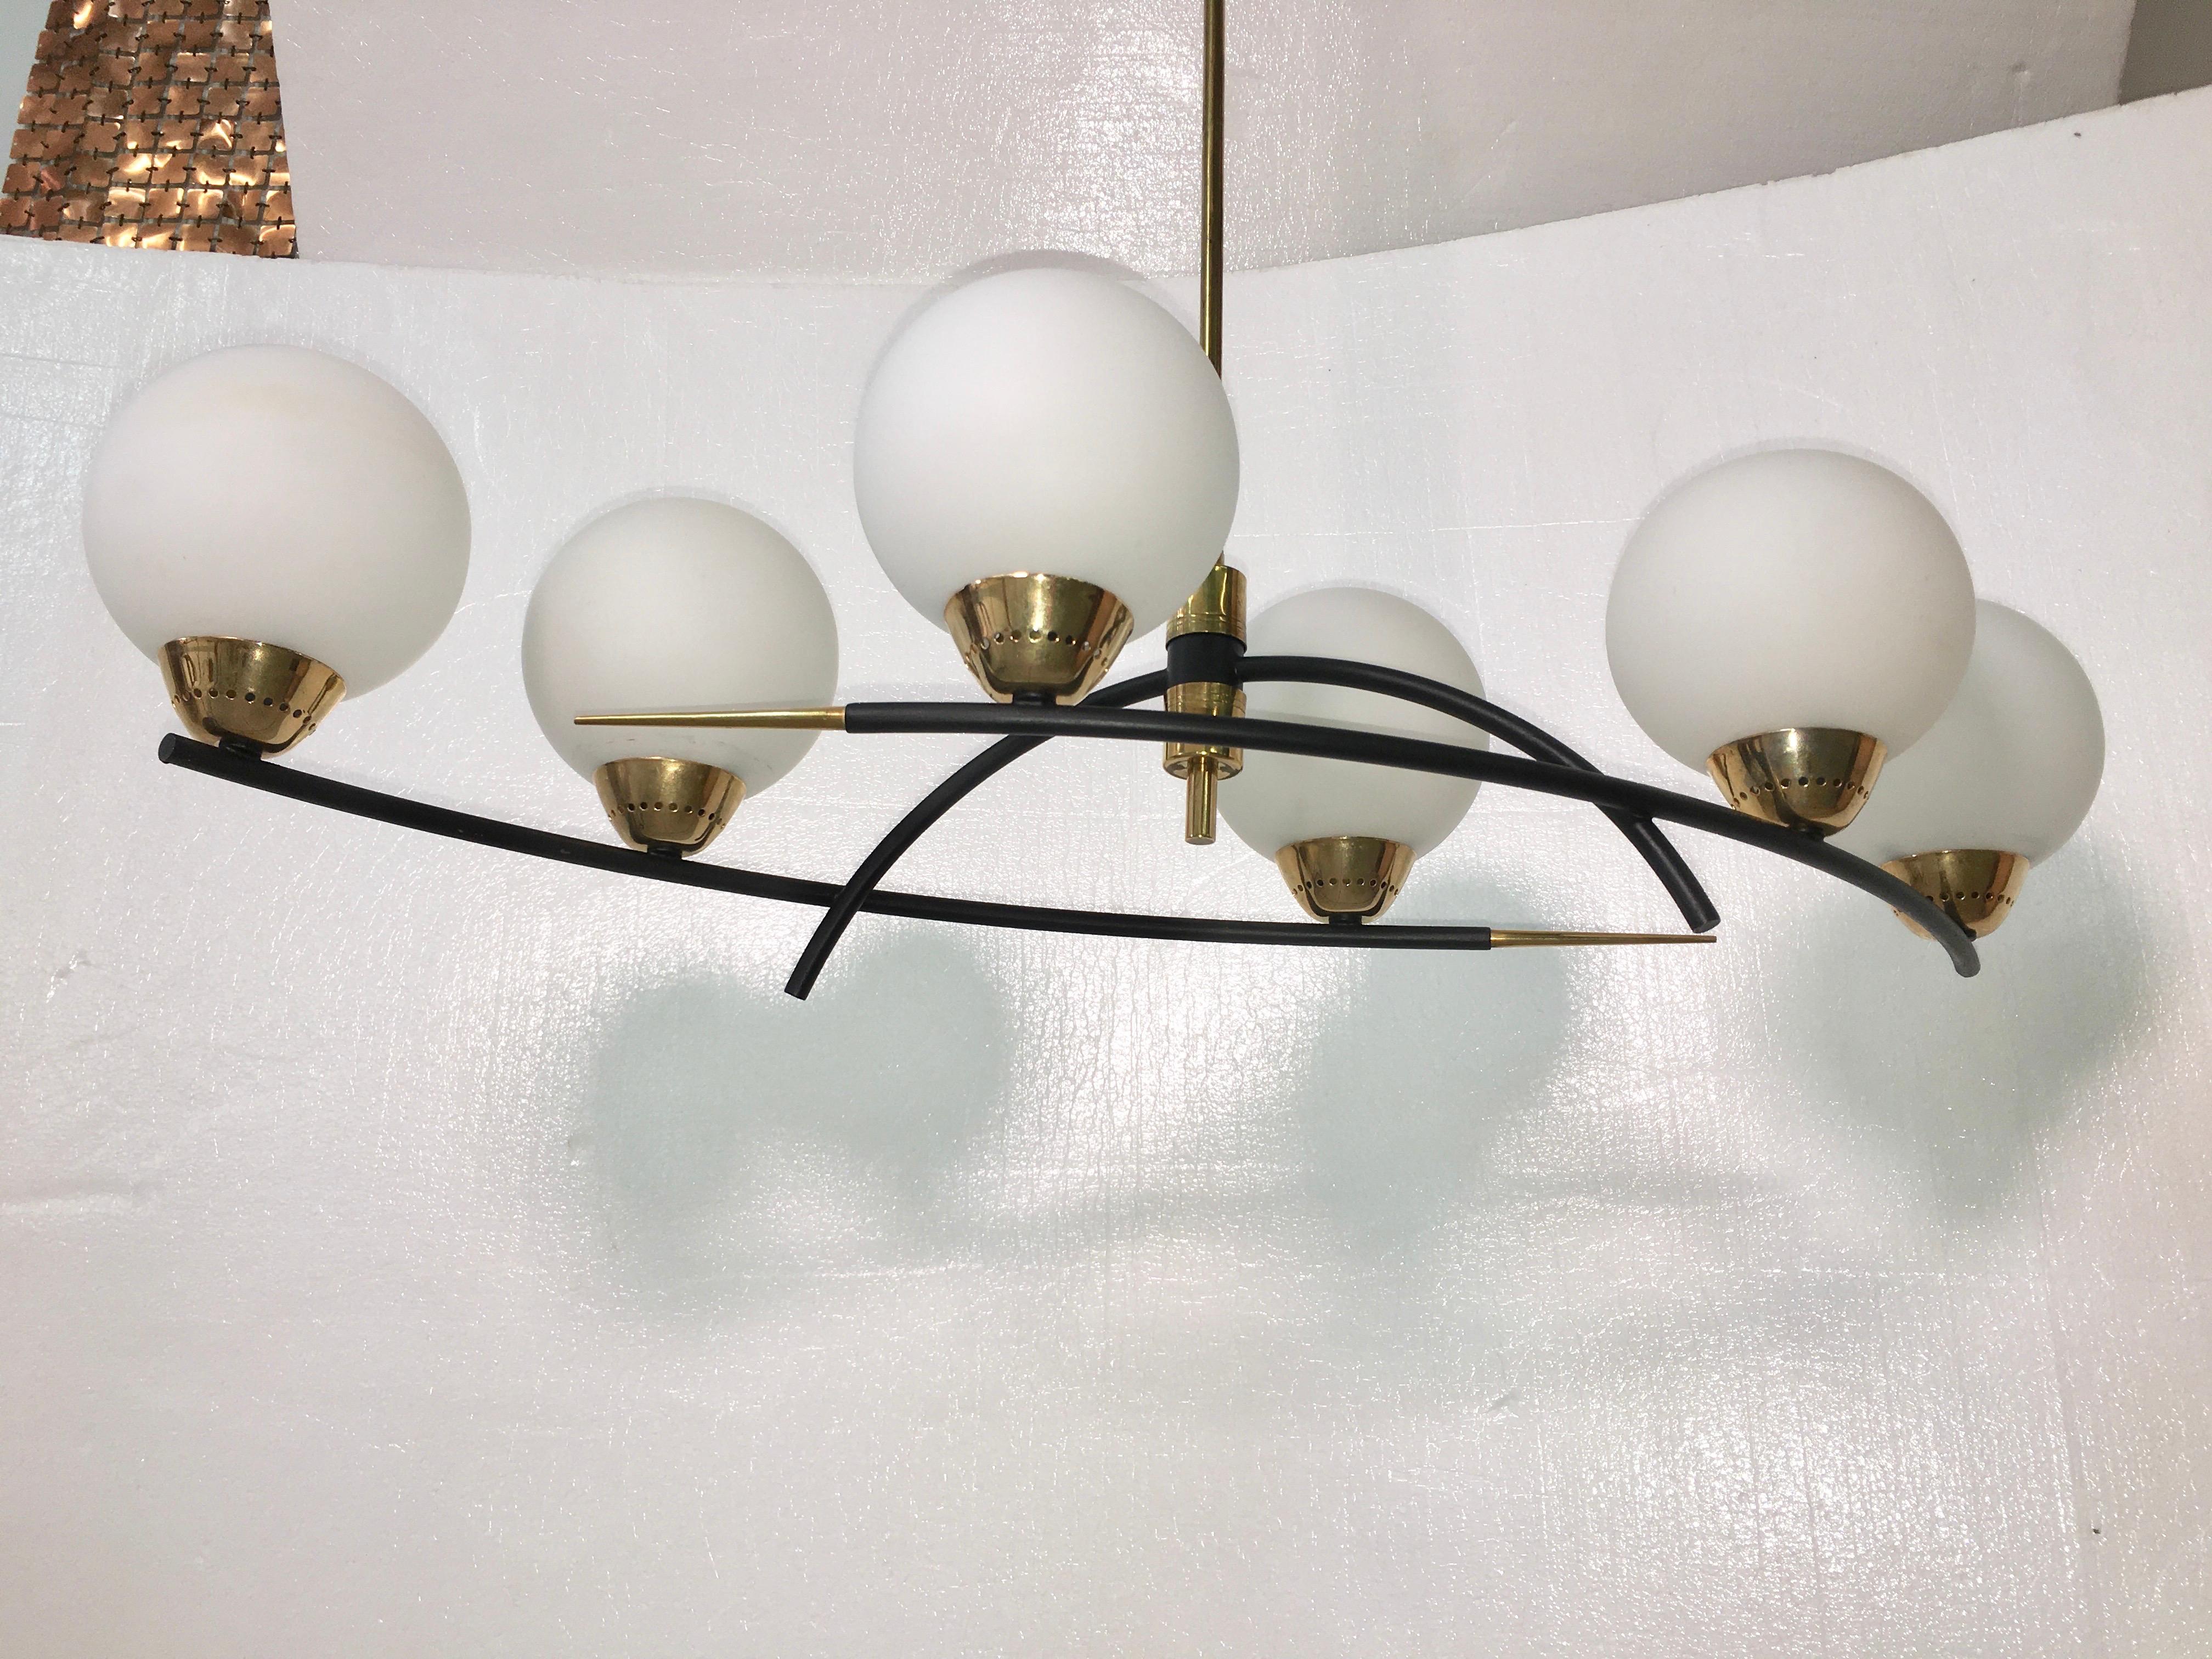 High quality and sculpturally Minimalist chandelier made of curved black enameled tubular brass embellished with solid brass finial spikes and having six brass bobeches holding six round satin opaline globes with candelabra bulbs inside. Rewired for